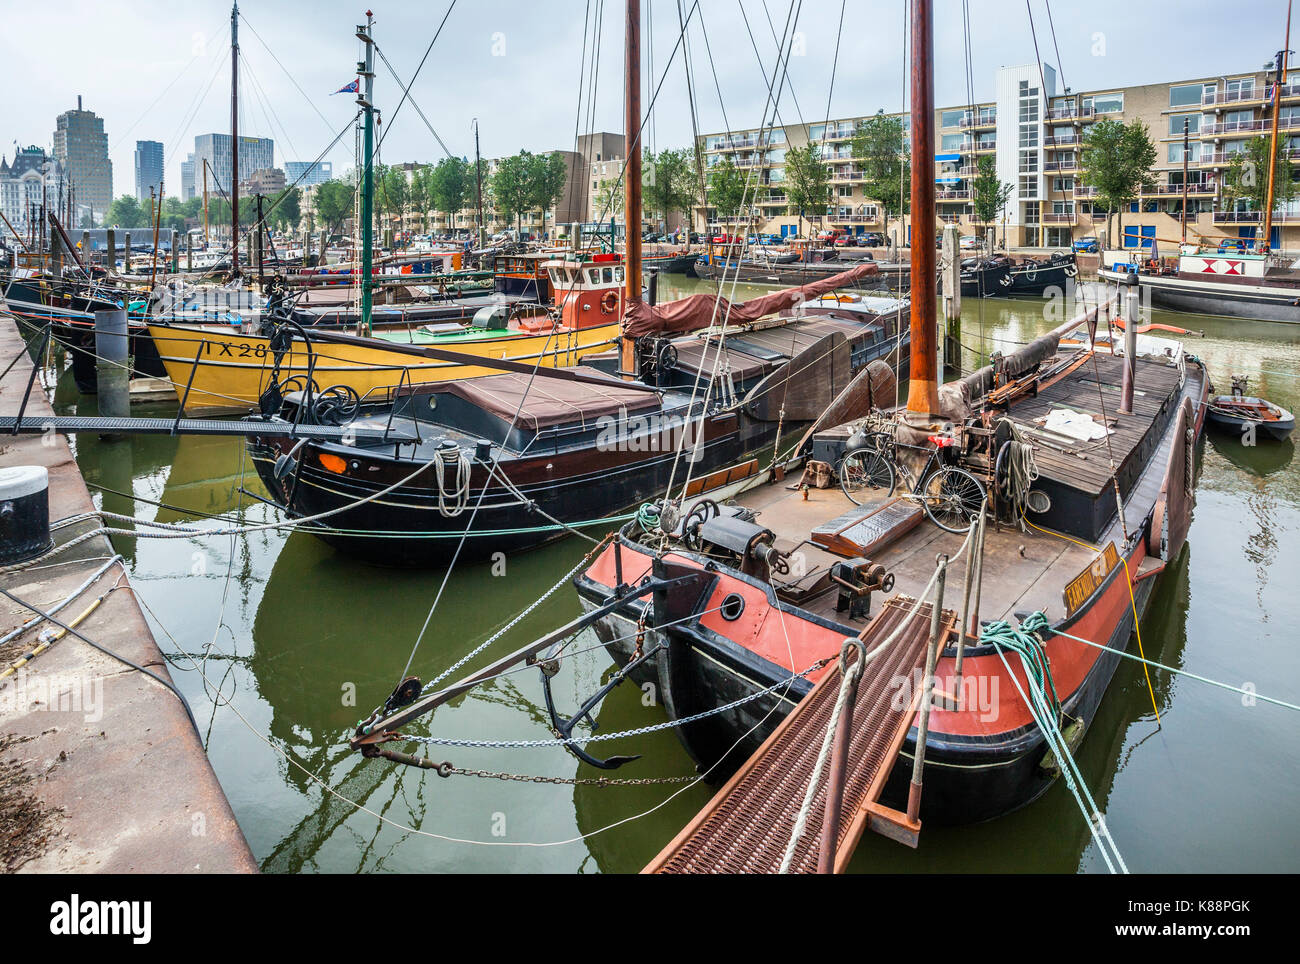 Netherlands, South Holland, Rotterdam, Maritime District, Haringvliet, part of Rotterdams old harbour that was once dedicated the fleet of the herring Stock Photo